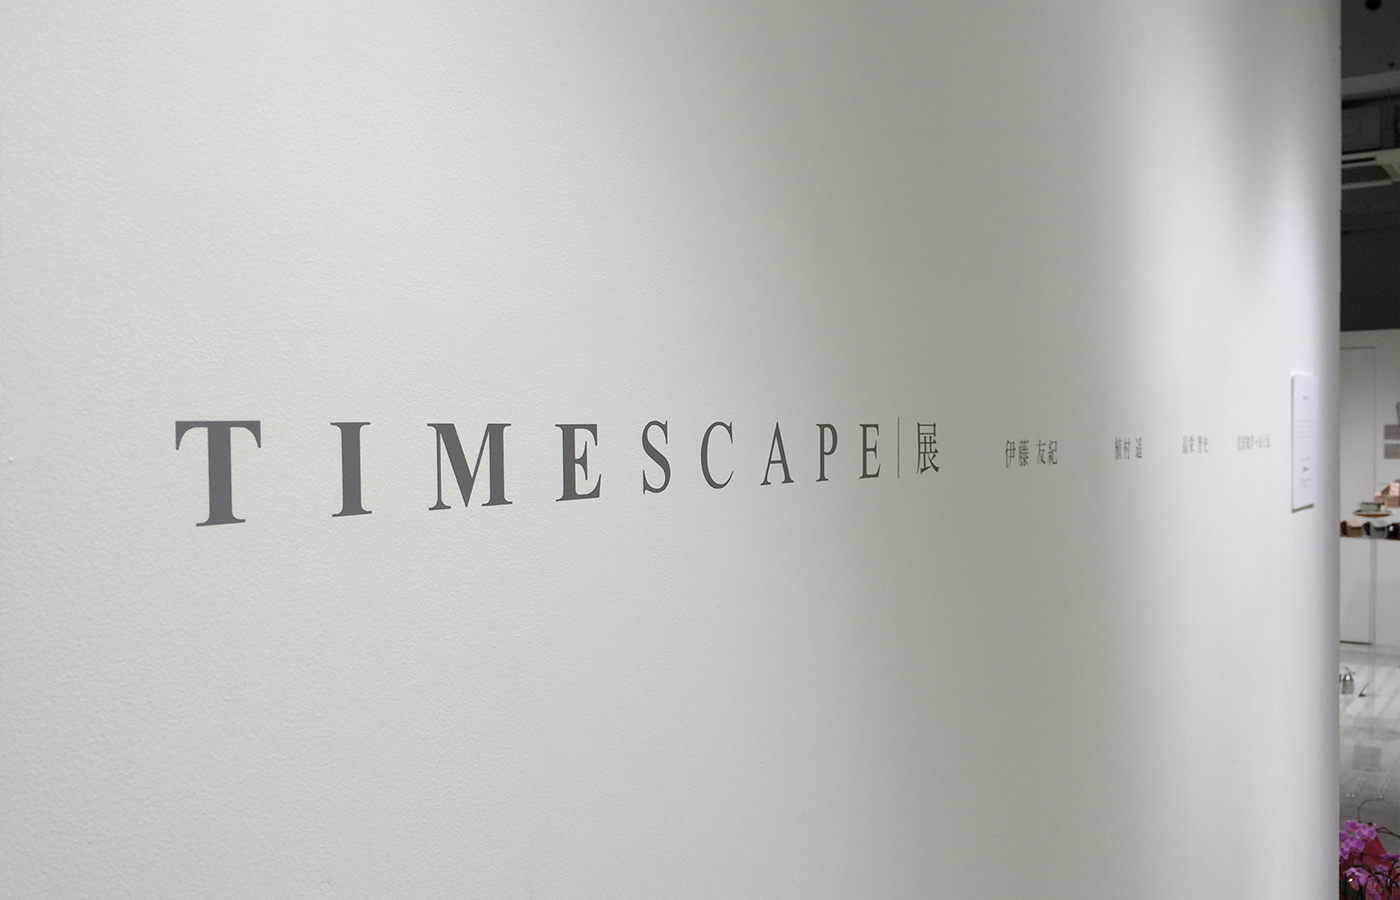 TIME SCAPE 展 in Prismic gallery